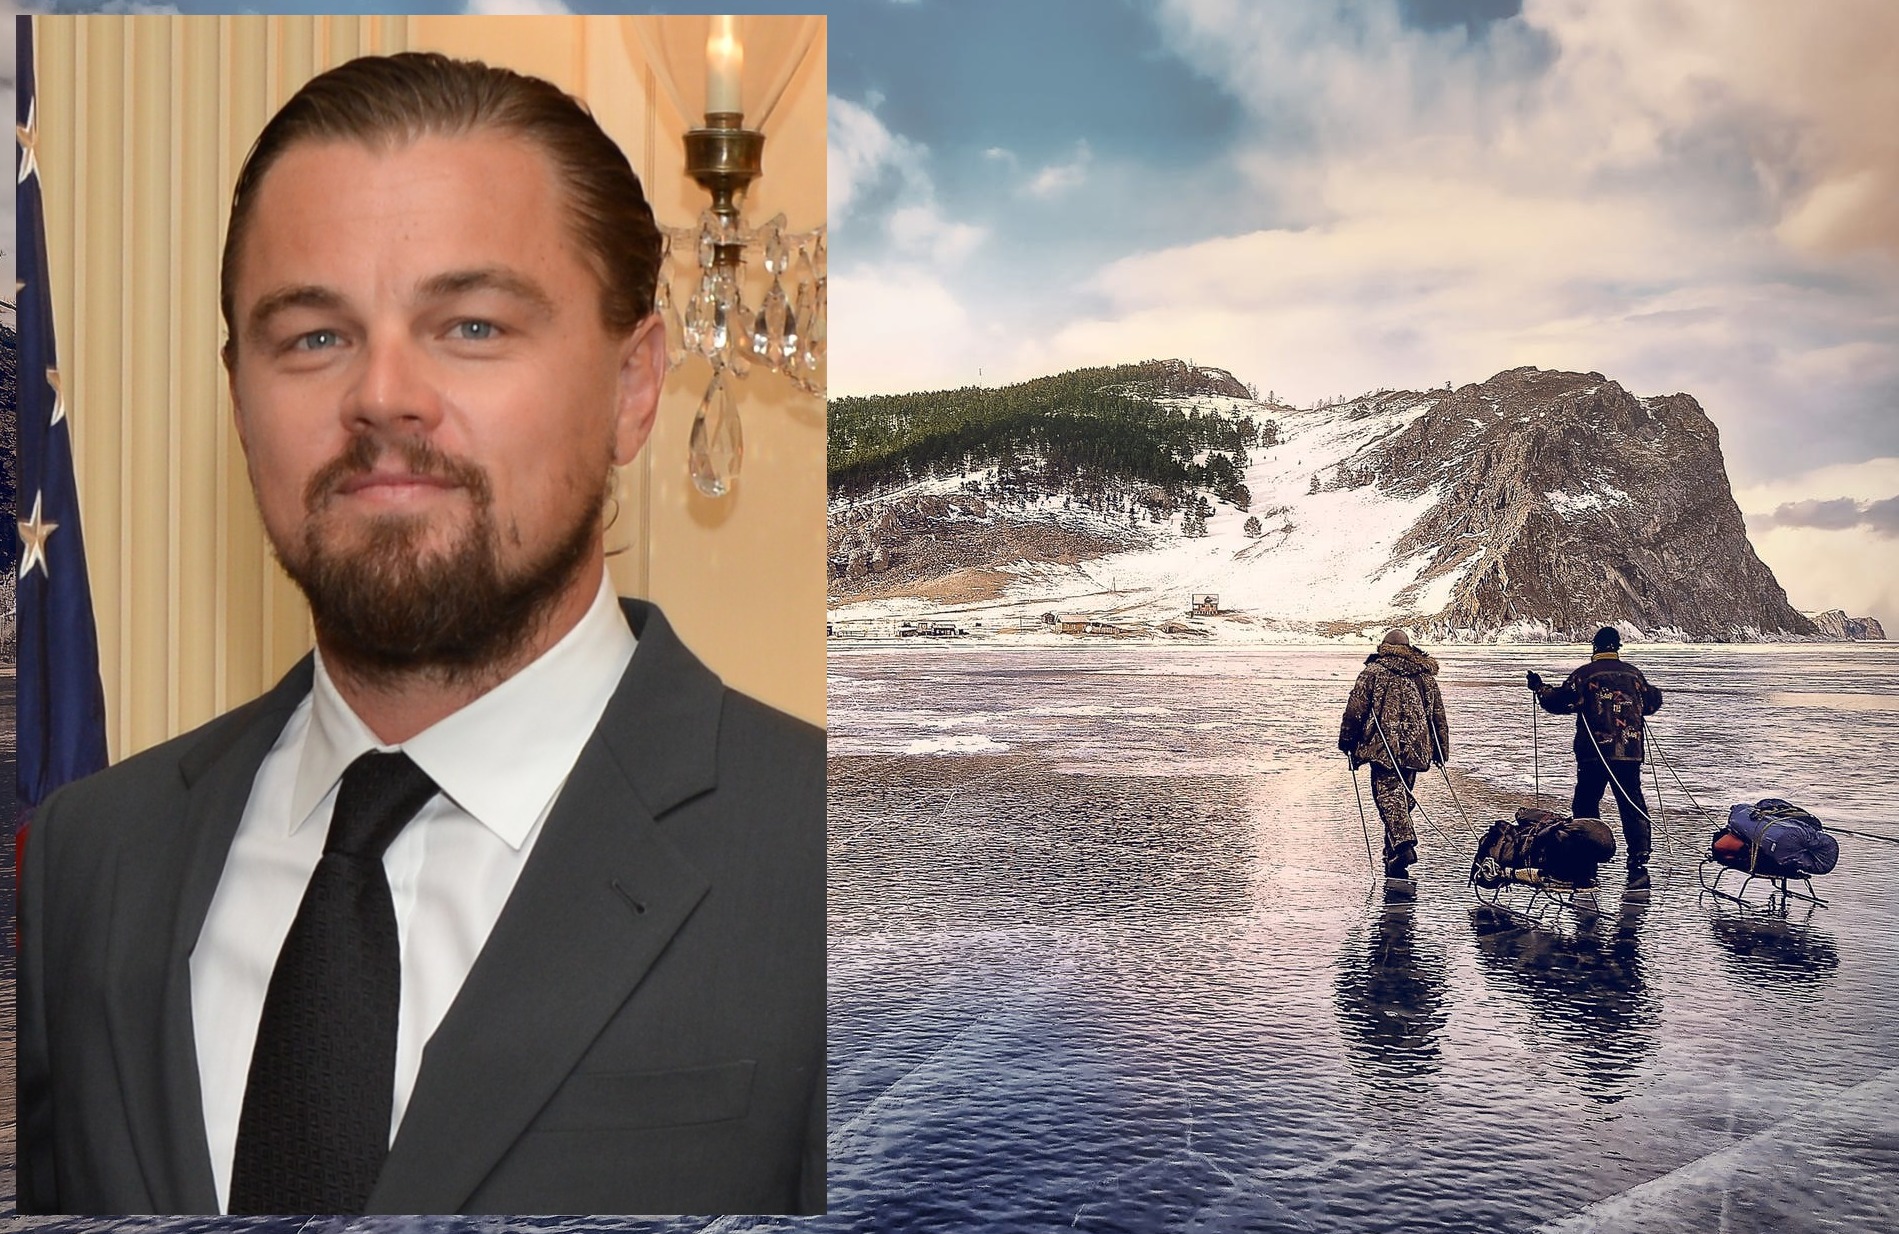 Leonardo DiCaprio, a famous actor and one of the most vocal environmentalists in Hollywood, is apparently being flooded with requests to "Save L...